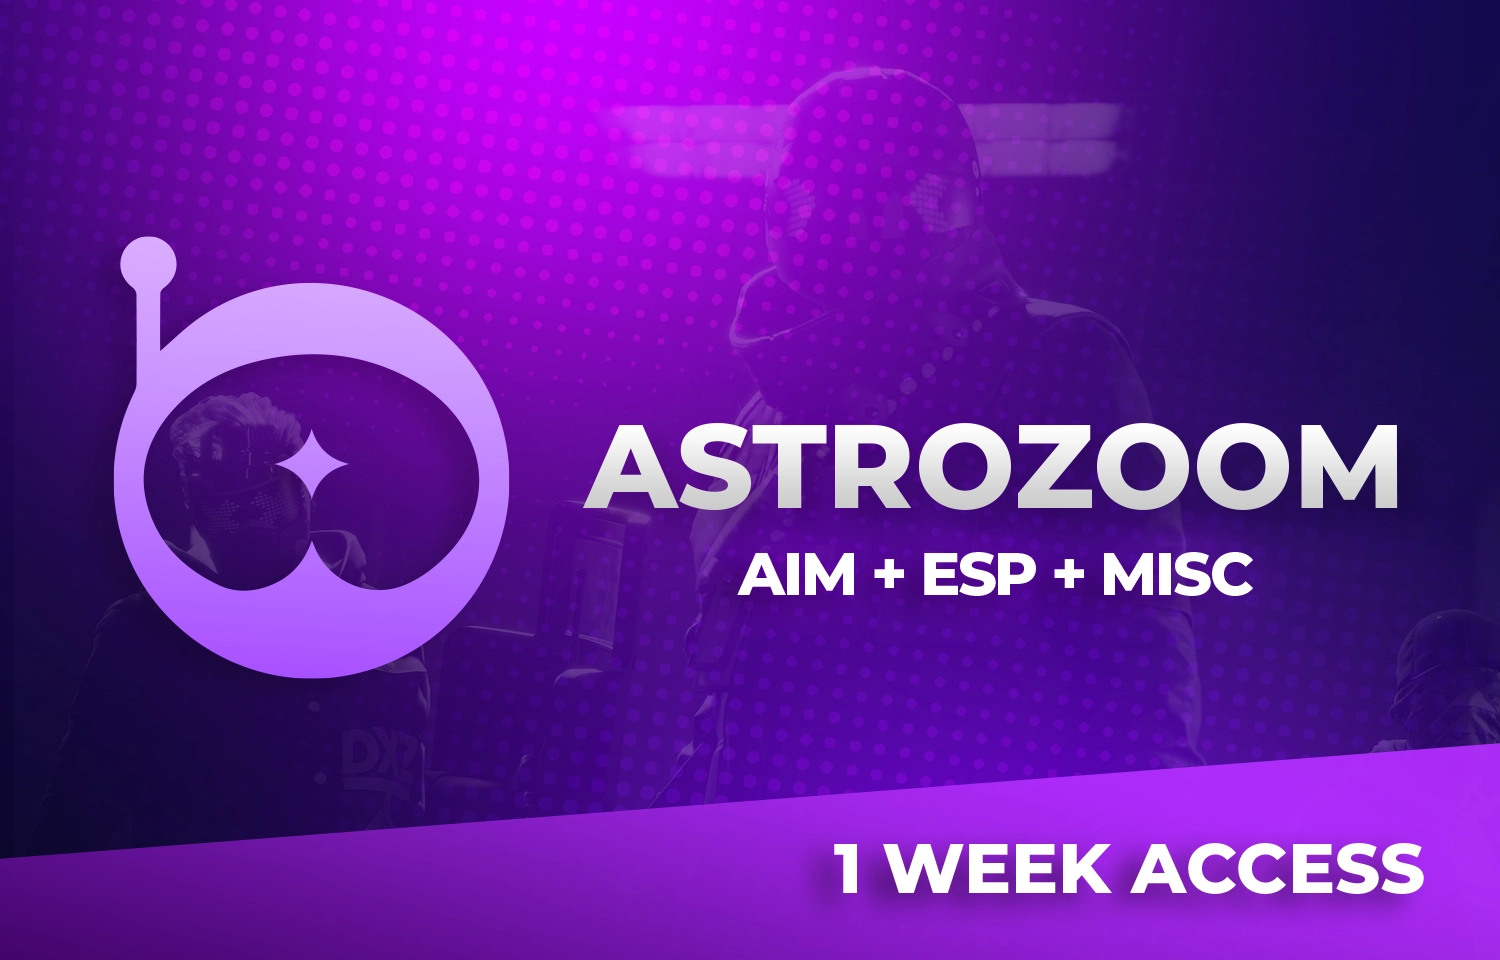 The Finals AstroZoom - Week key